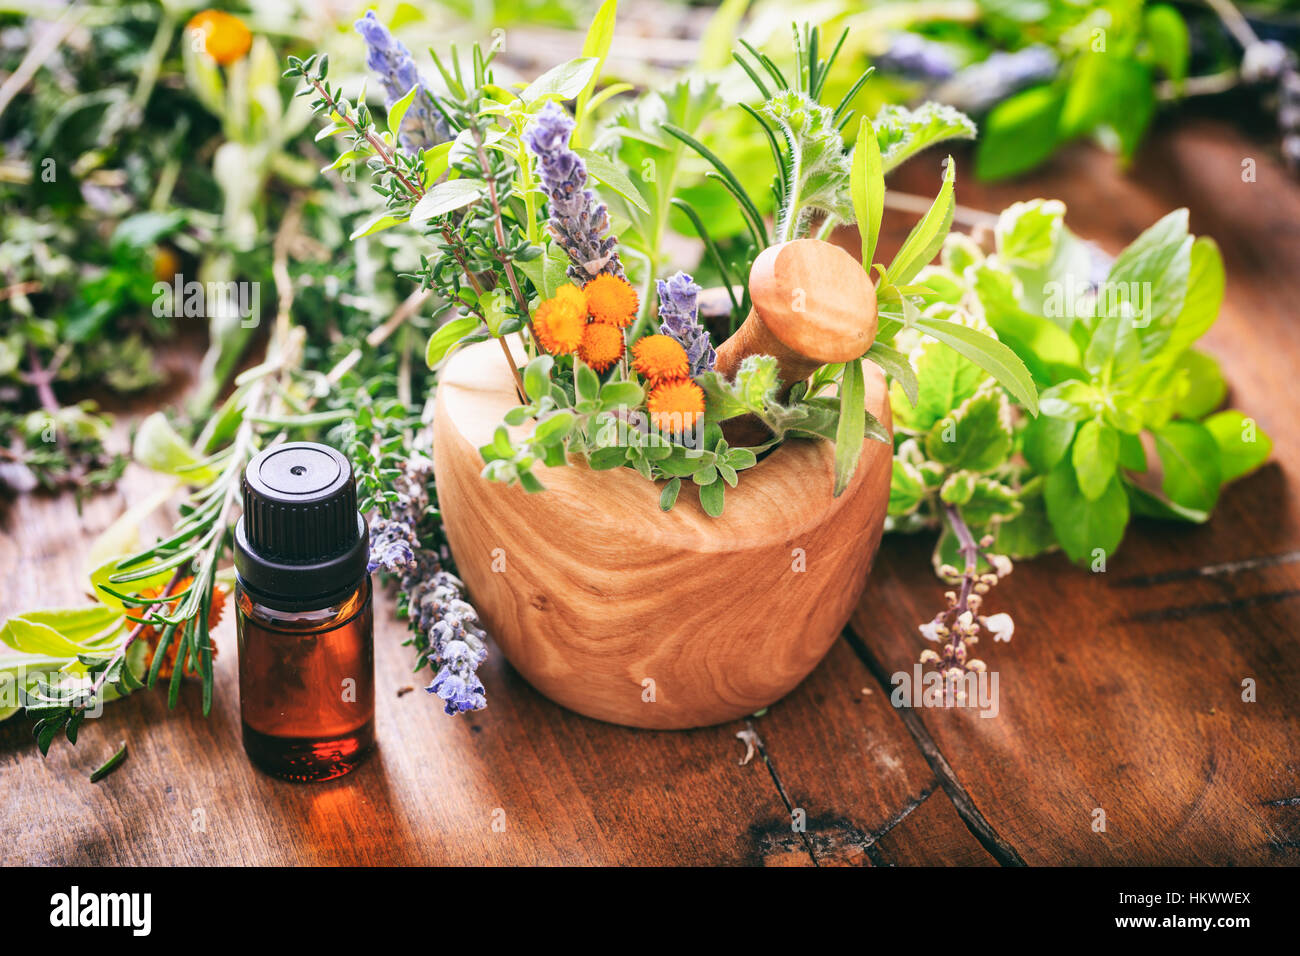 Variety of fresh herbs and mortar on a wooden background Stock Photo